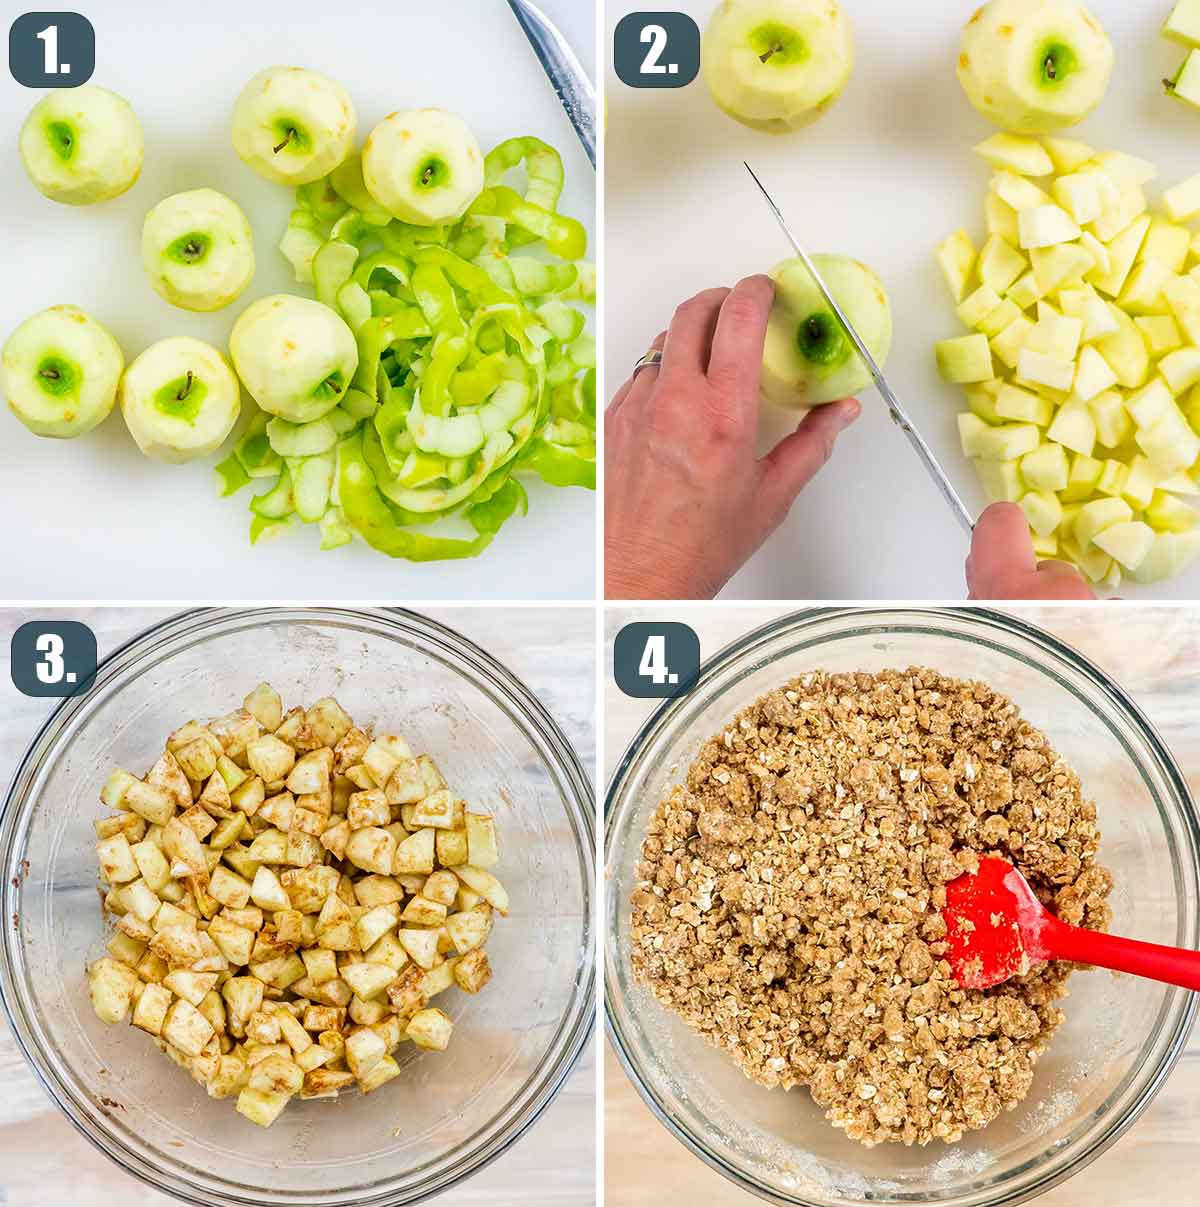 detailed process shots showing how to make apple crumble.